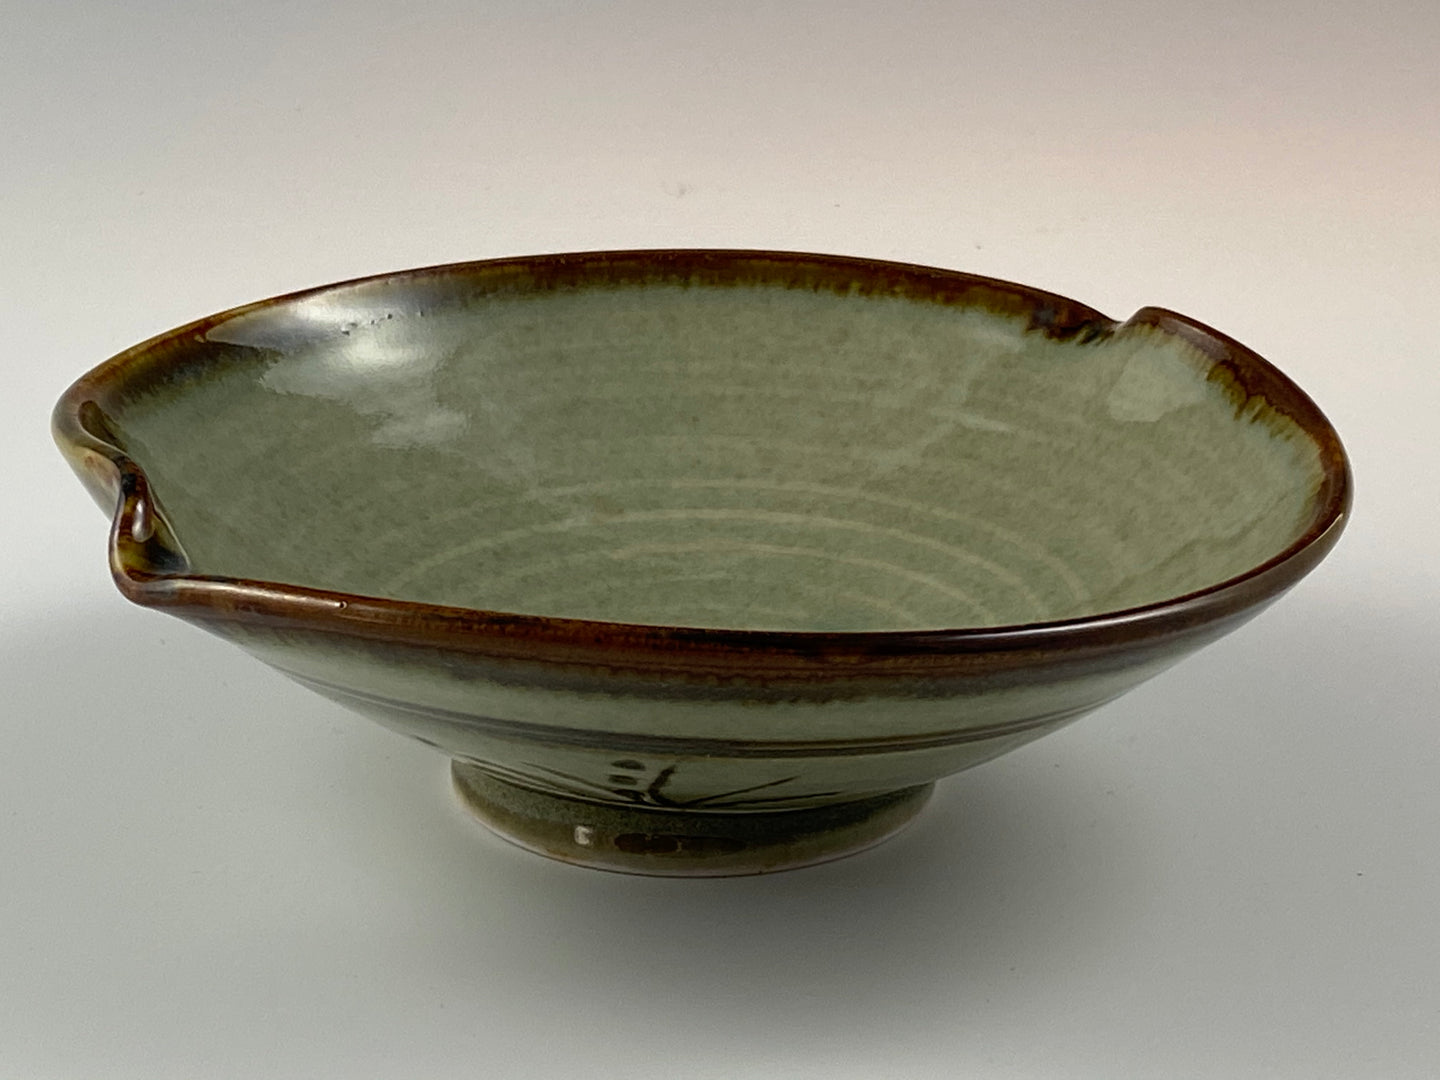 Small Celadon Iron Accented Bowl